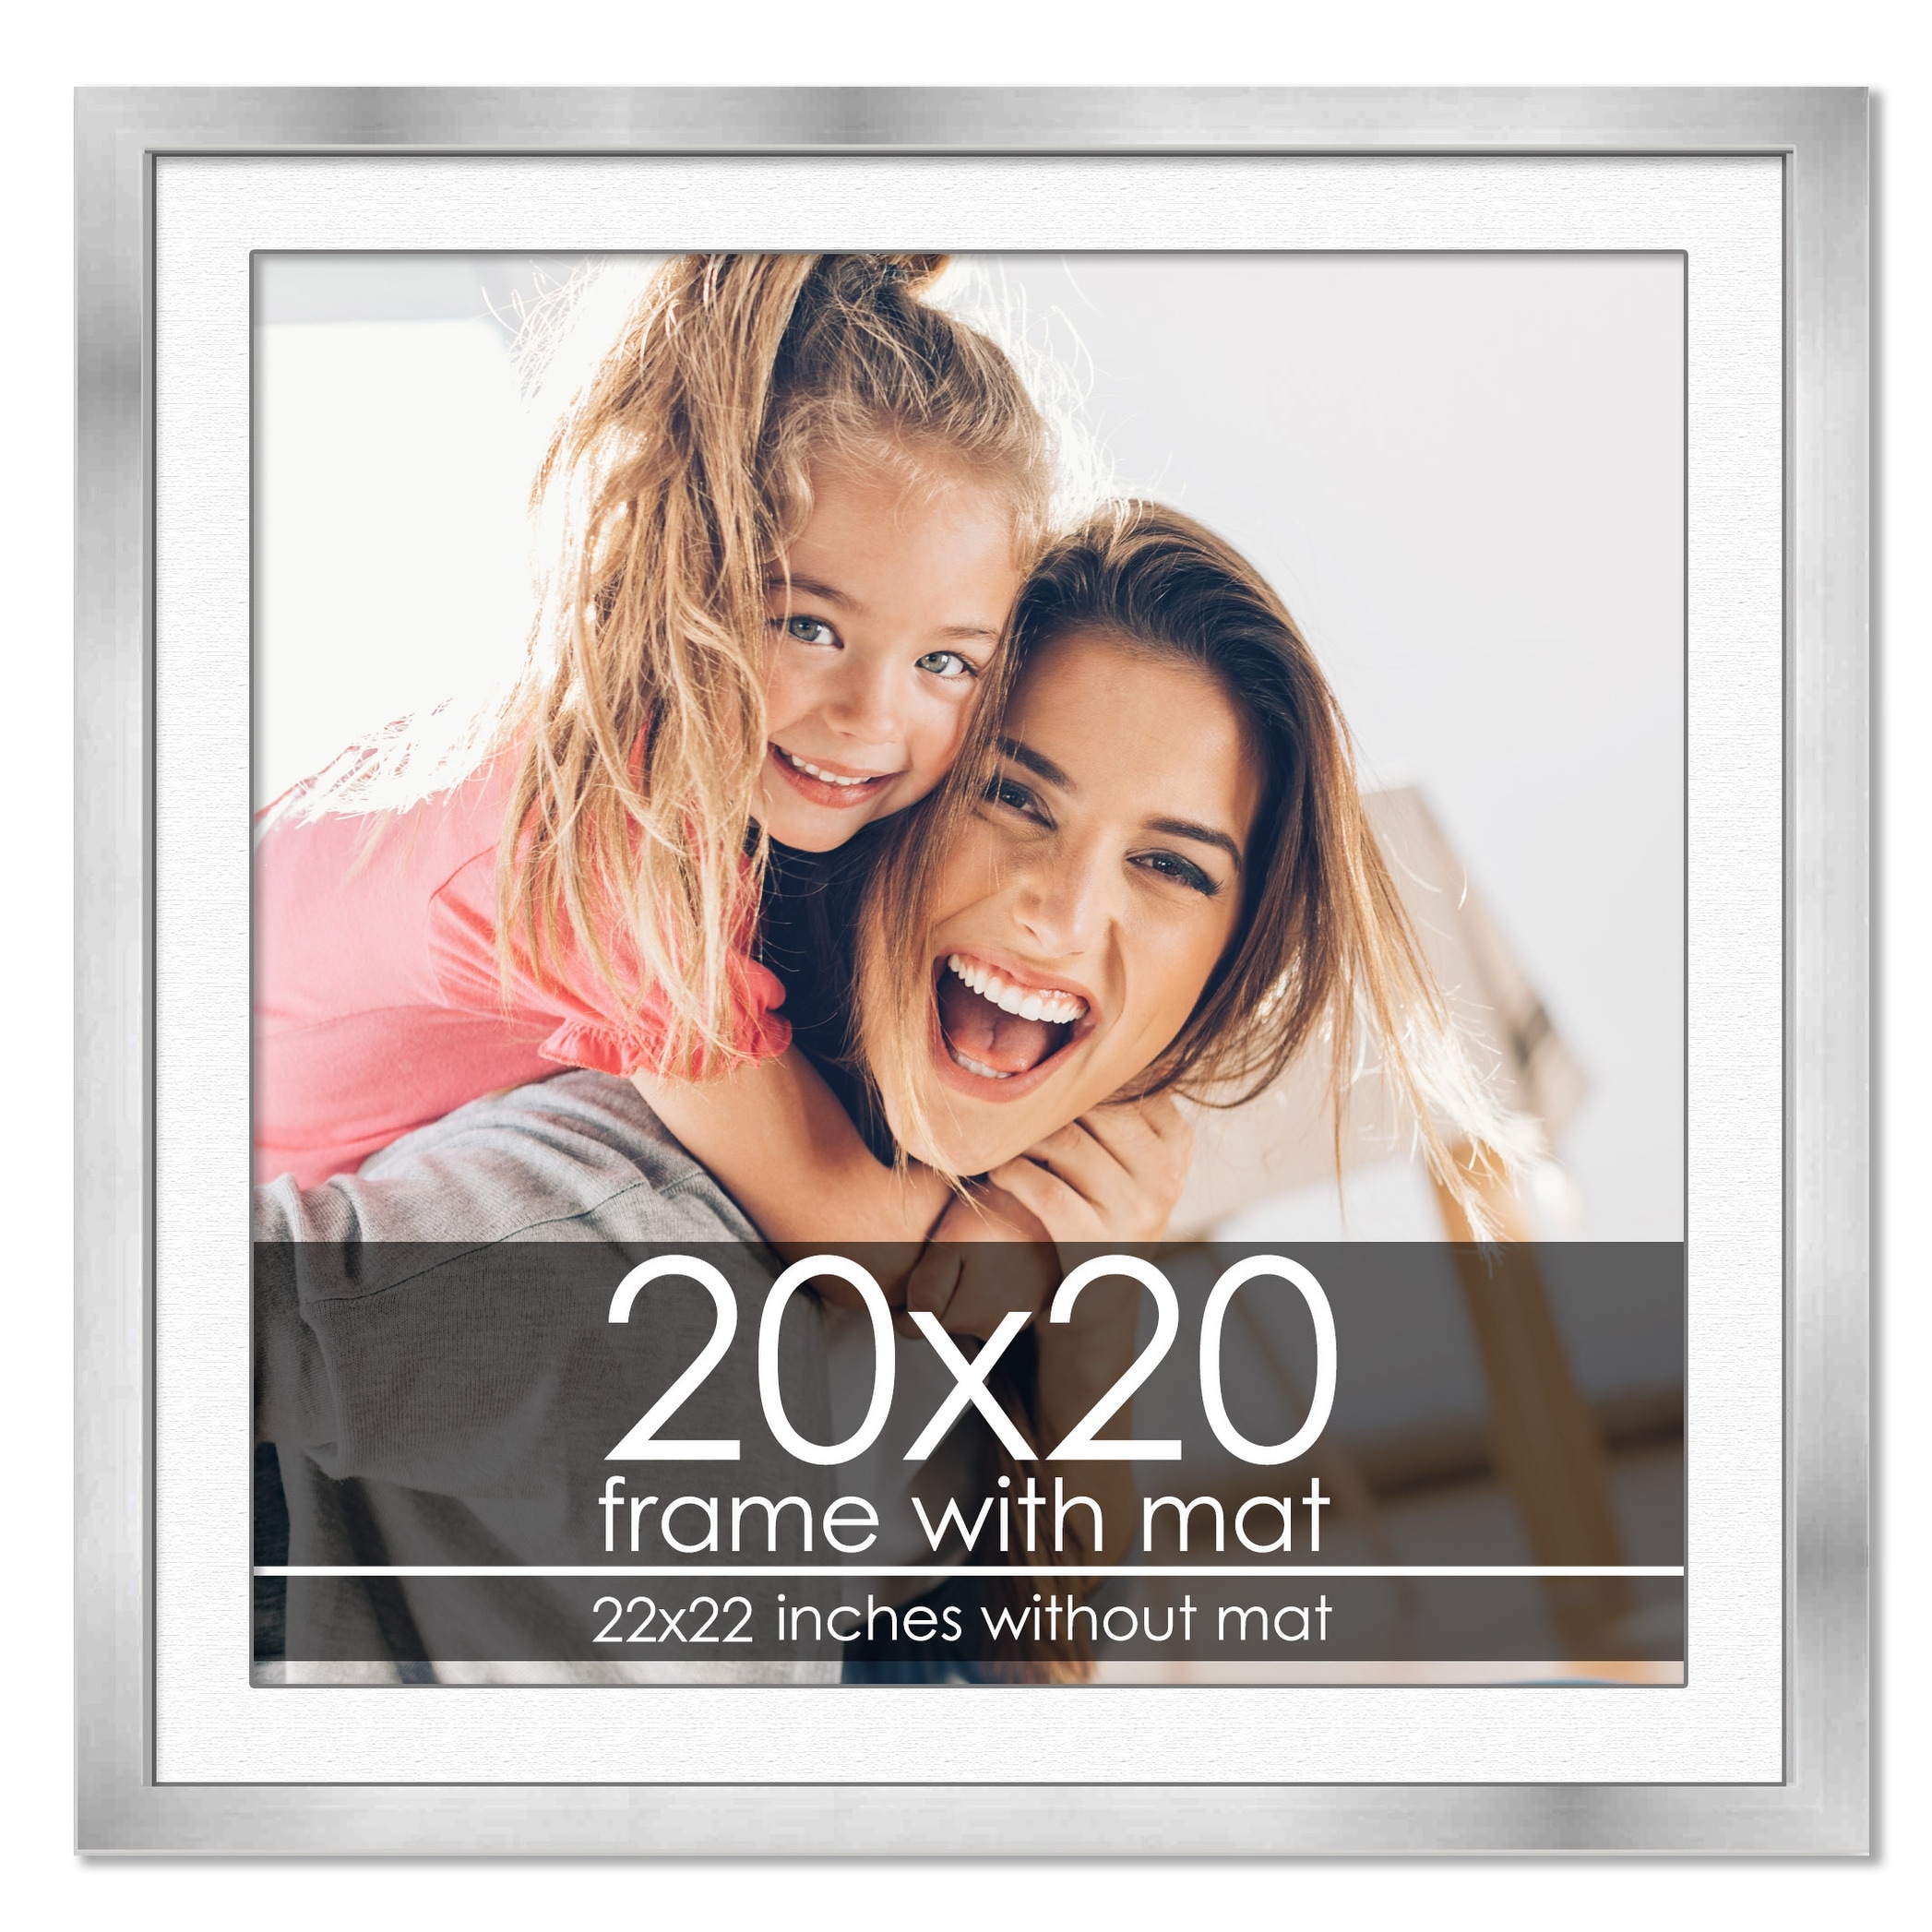 20x20 Frame with Mat - Silver 22X22 Frame Wood Made to Display Print or Poster Measuring 20 x 20 Inches with White Photo Mat